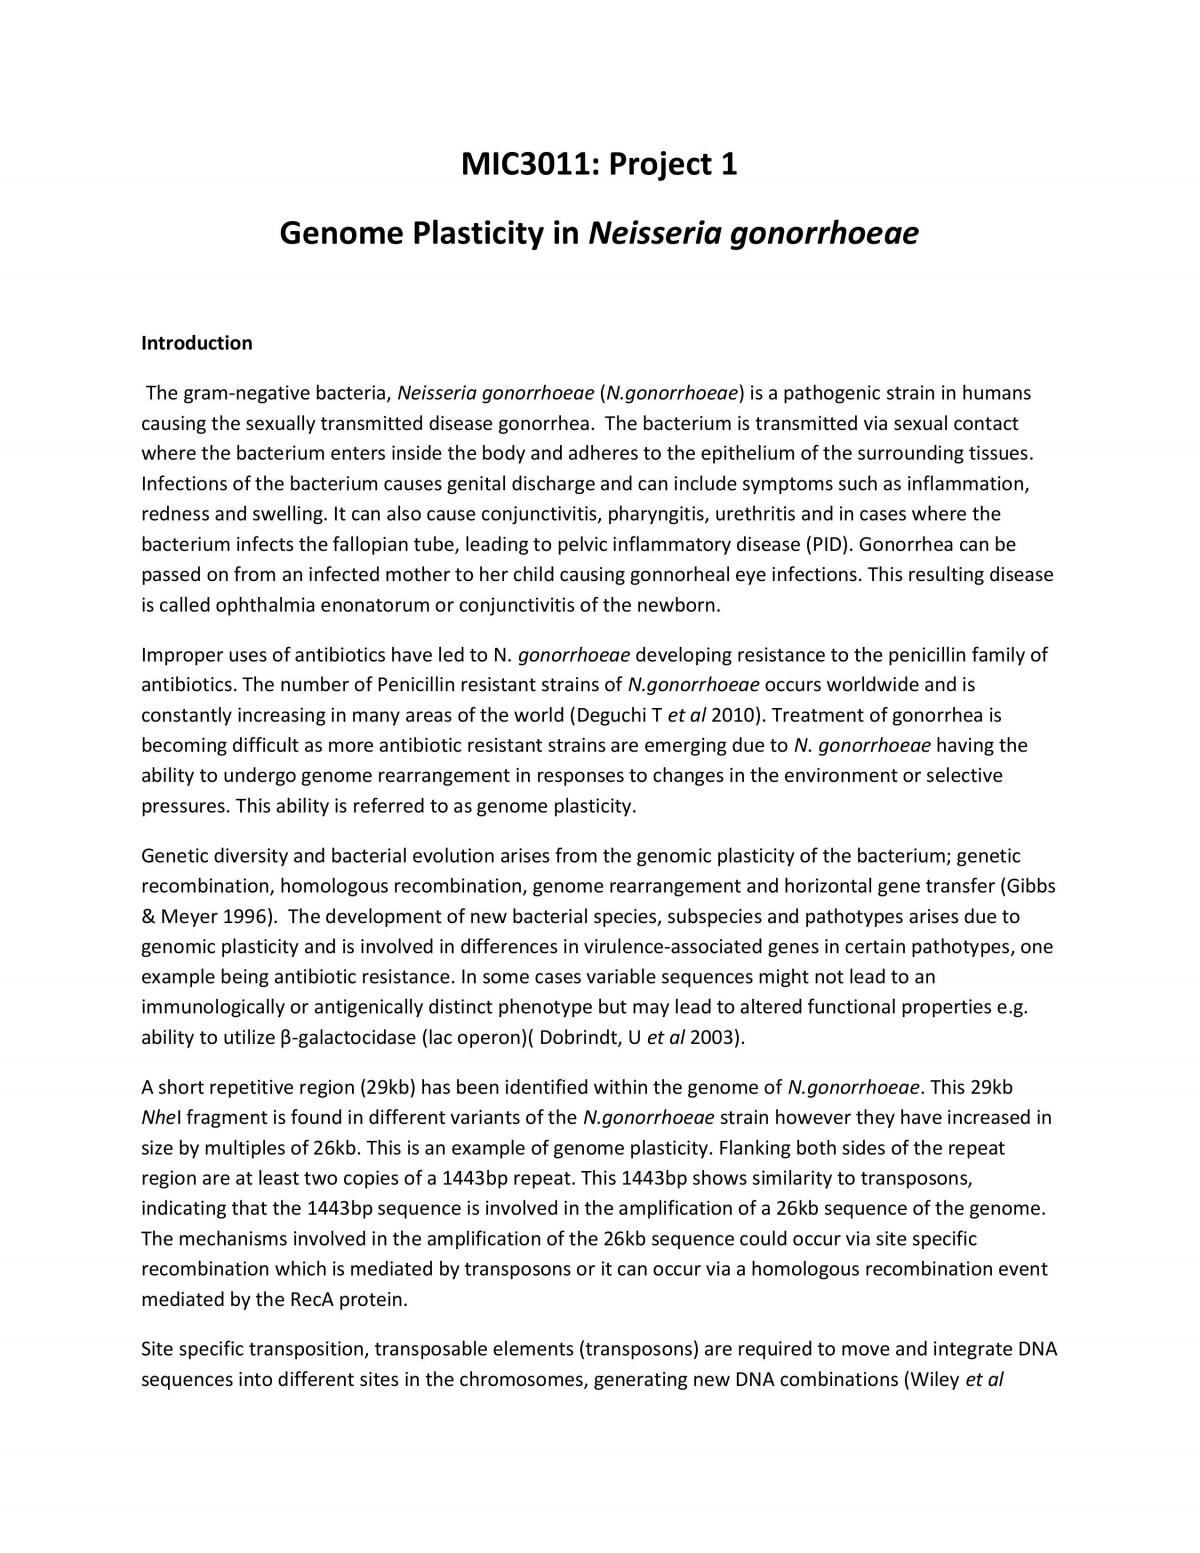 MIC3011 Project 1. Genome Plasticity in Neisseria gonorrhoeae - Page 1